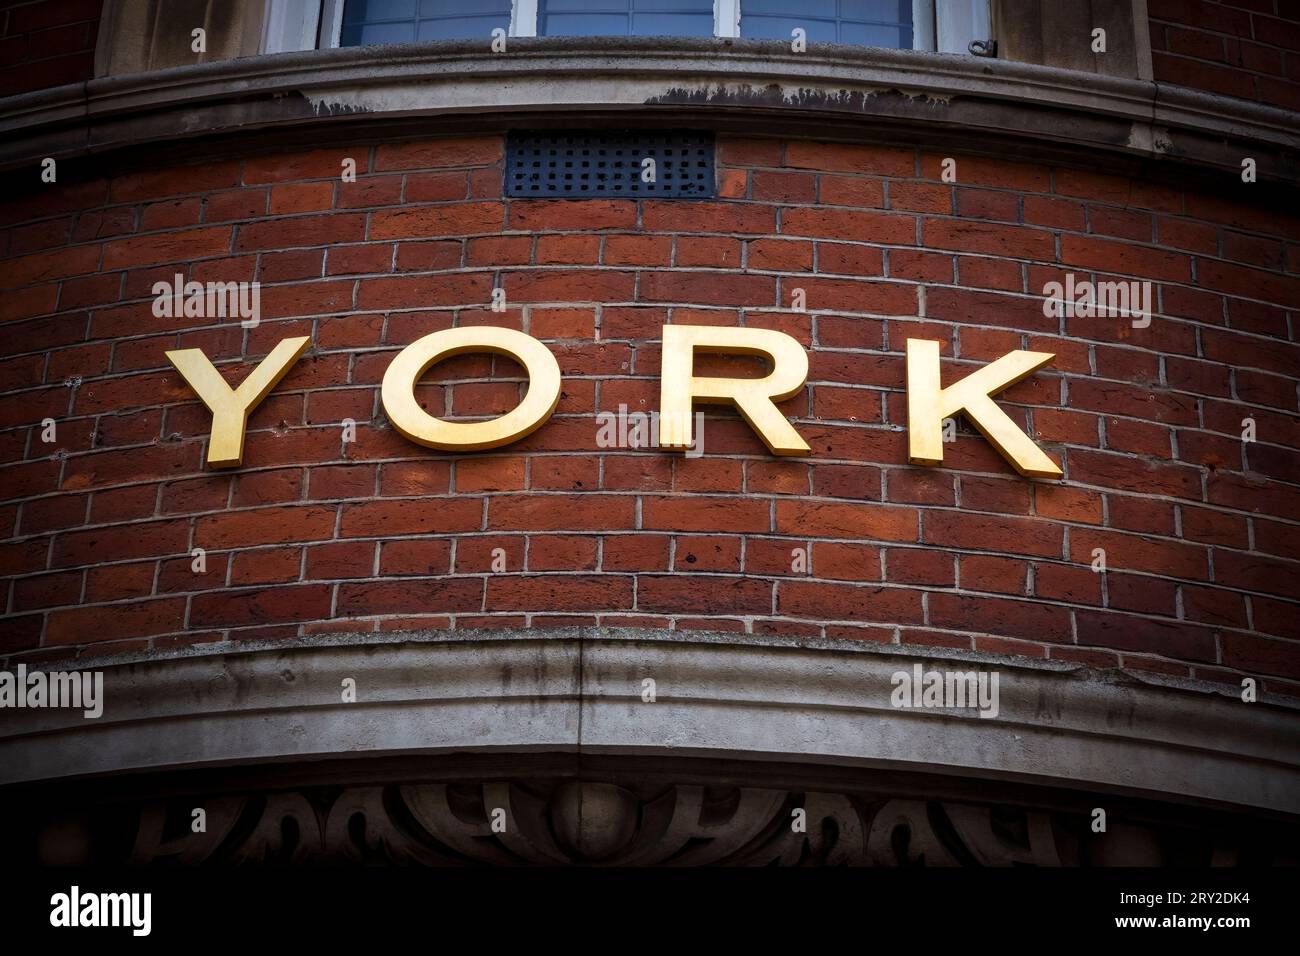 York sign in golden lettering in city centre Stock Photo